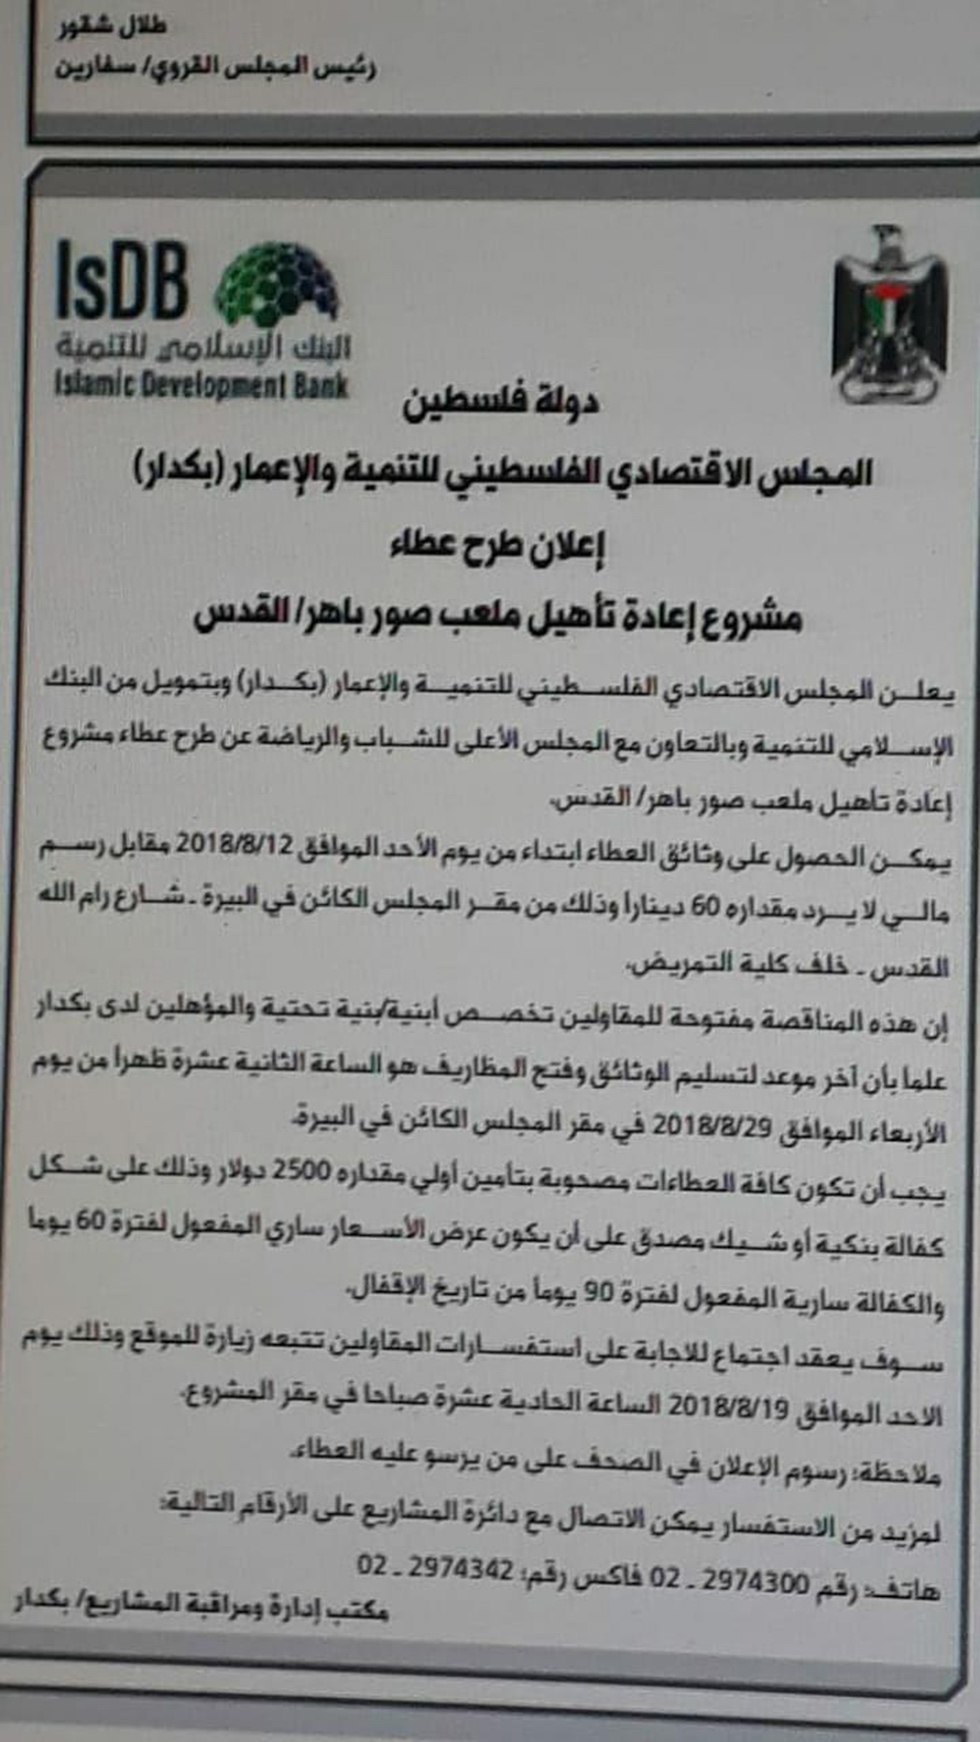 The tender issued by the Palestinian Authority